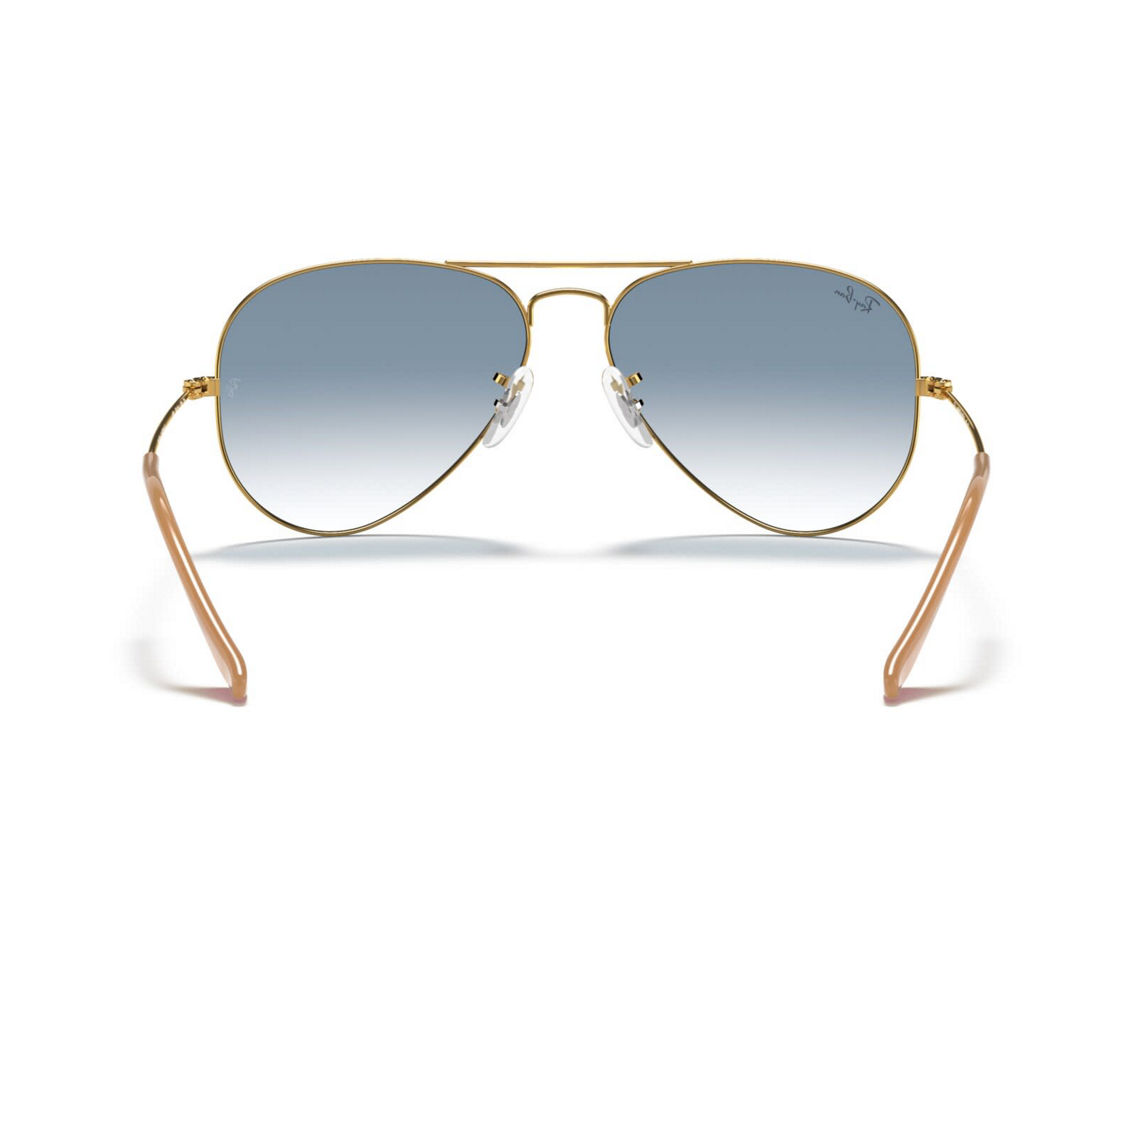 Ray-Ban RB3025 Aviator Gradient - Image 4 of 5